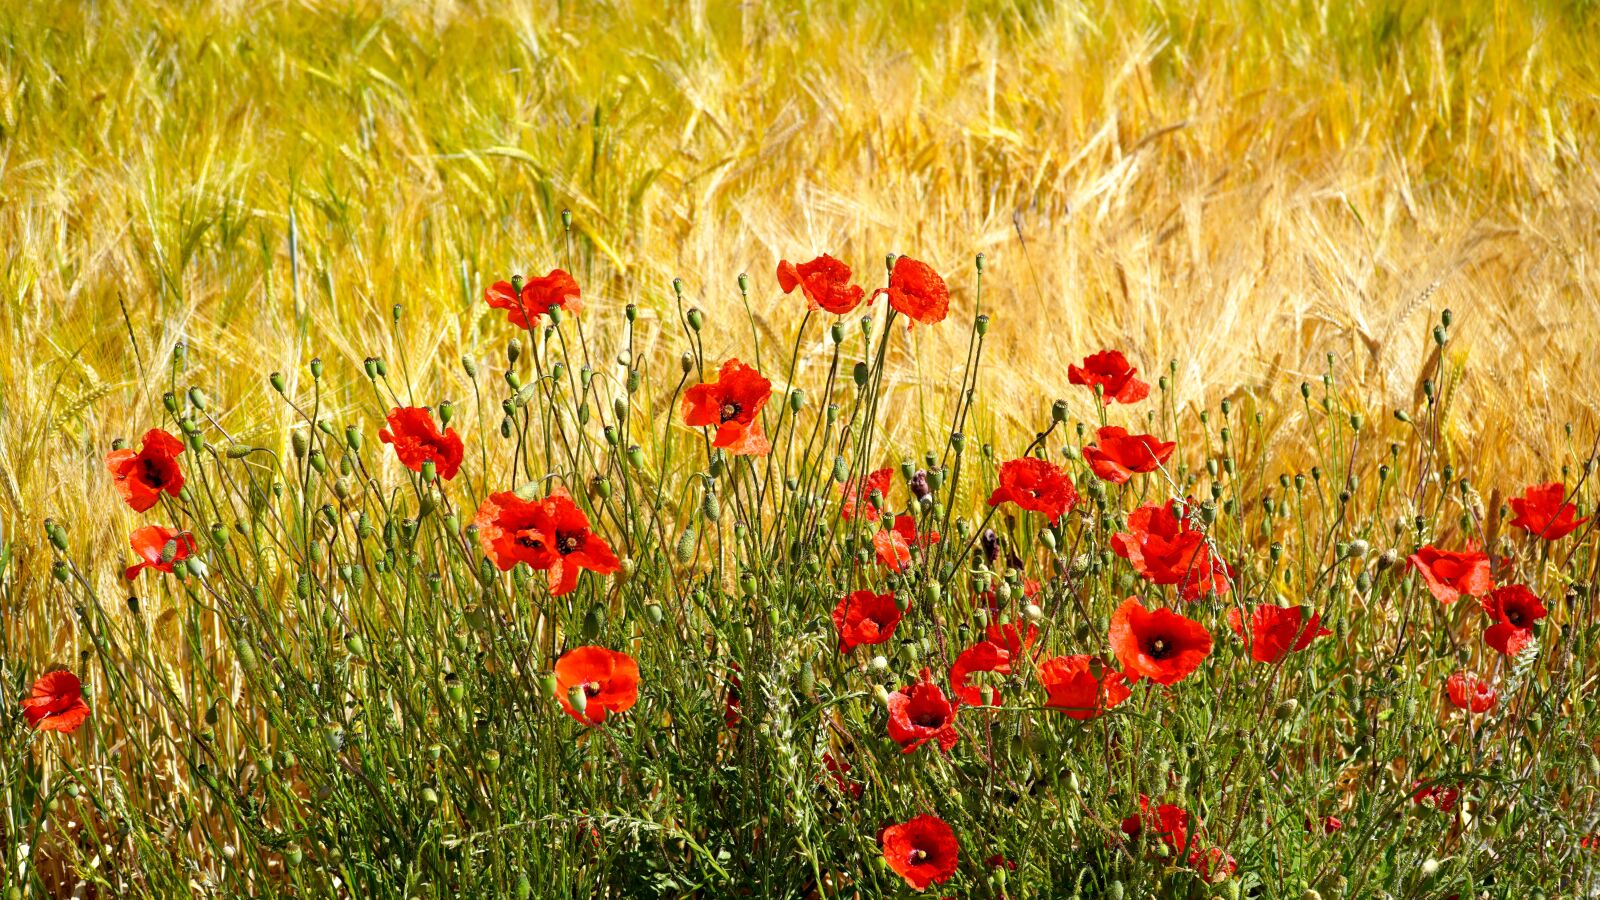 Sony E PZ 18-105mm F4 G OSS sample photo. Poppies, cornfield, cereals photography